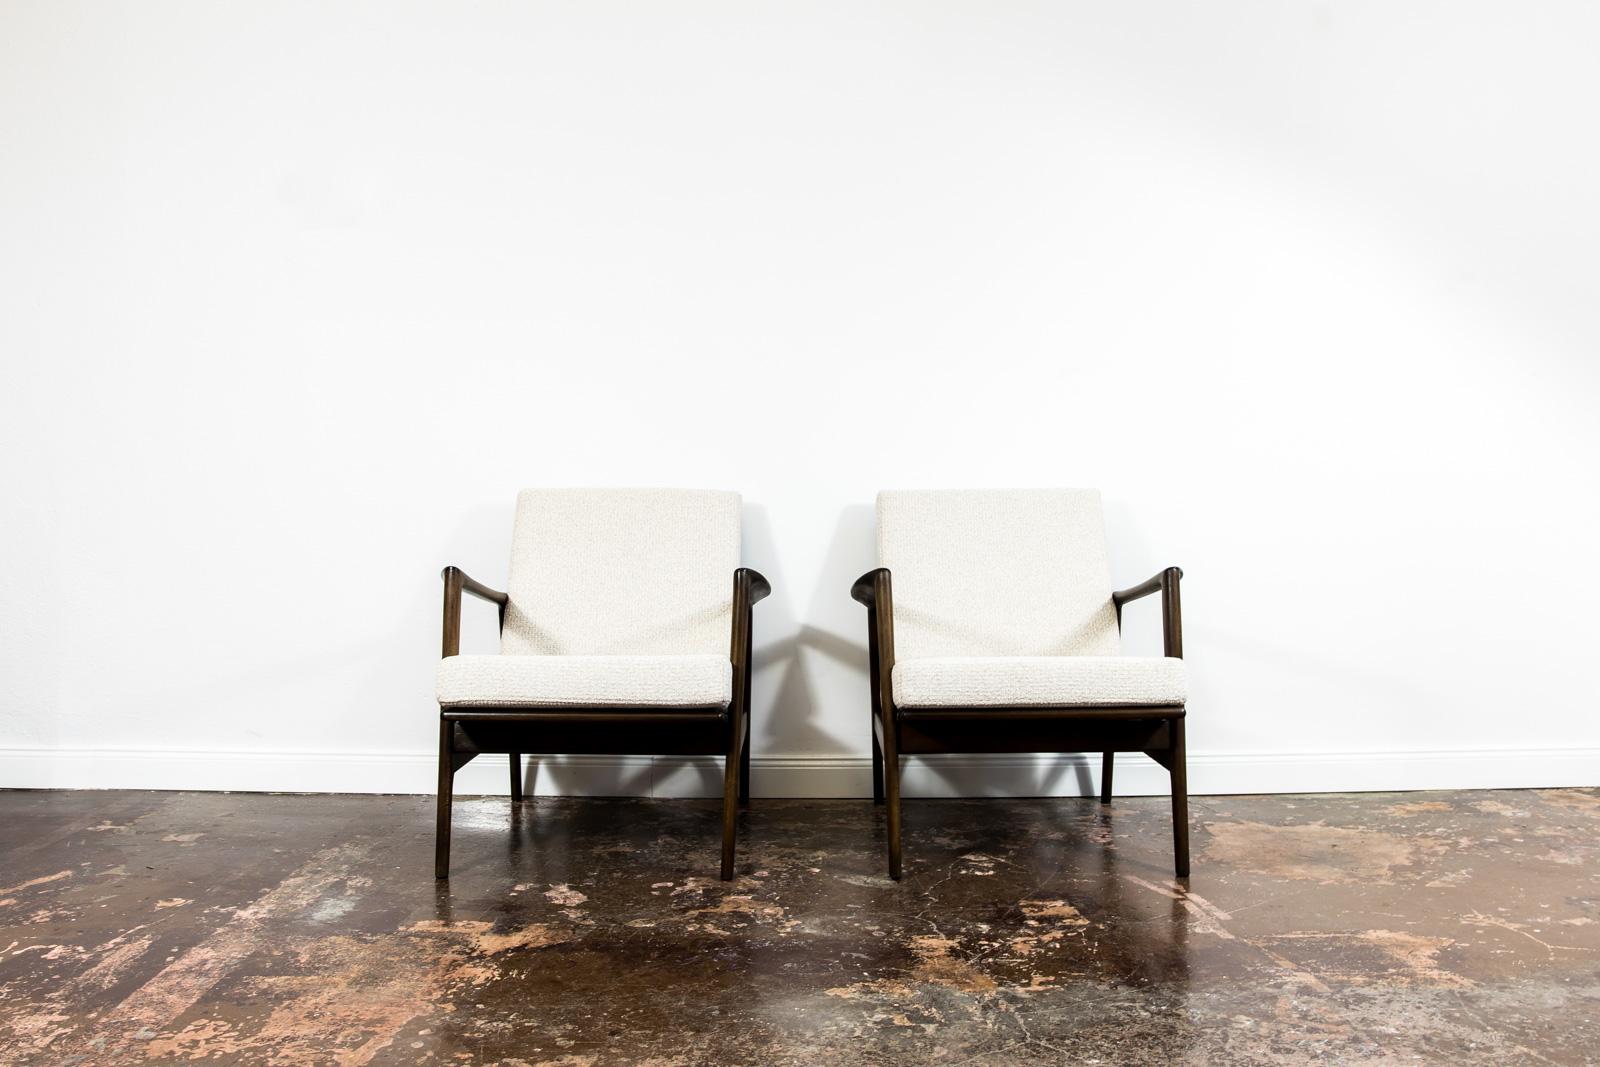 Customizable Pair of Mid Century Modern Armchairs Type 300-130, 1960s, Poland
Reupholstered in cream white soft fabric.
Solid beech frames have been completely restored and refinished.
We offer fabric customization upon request.